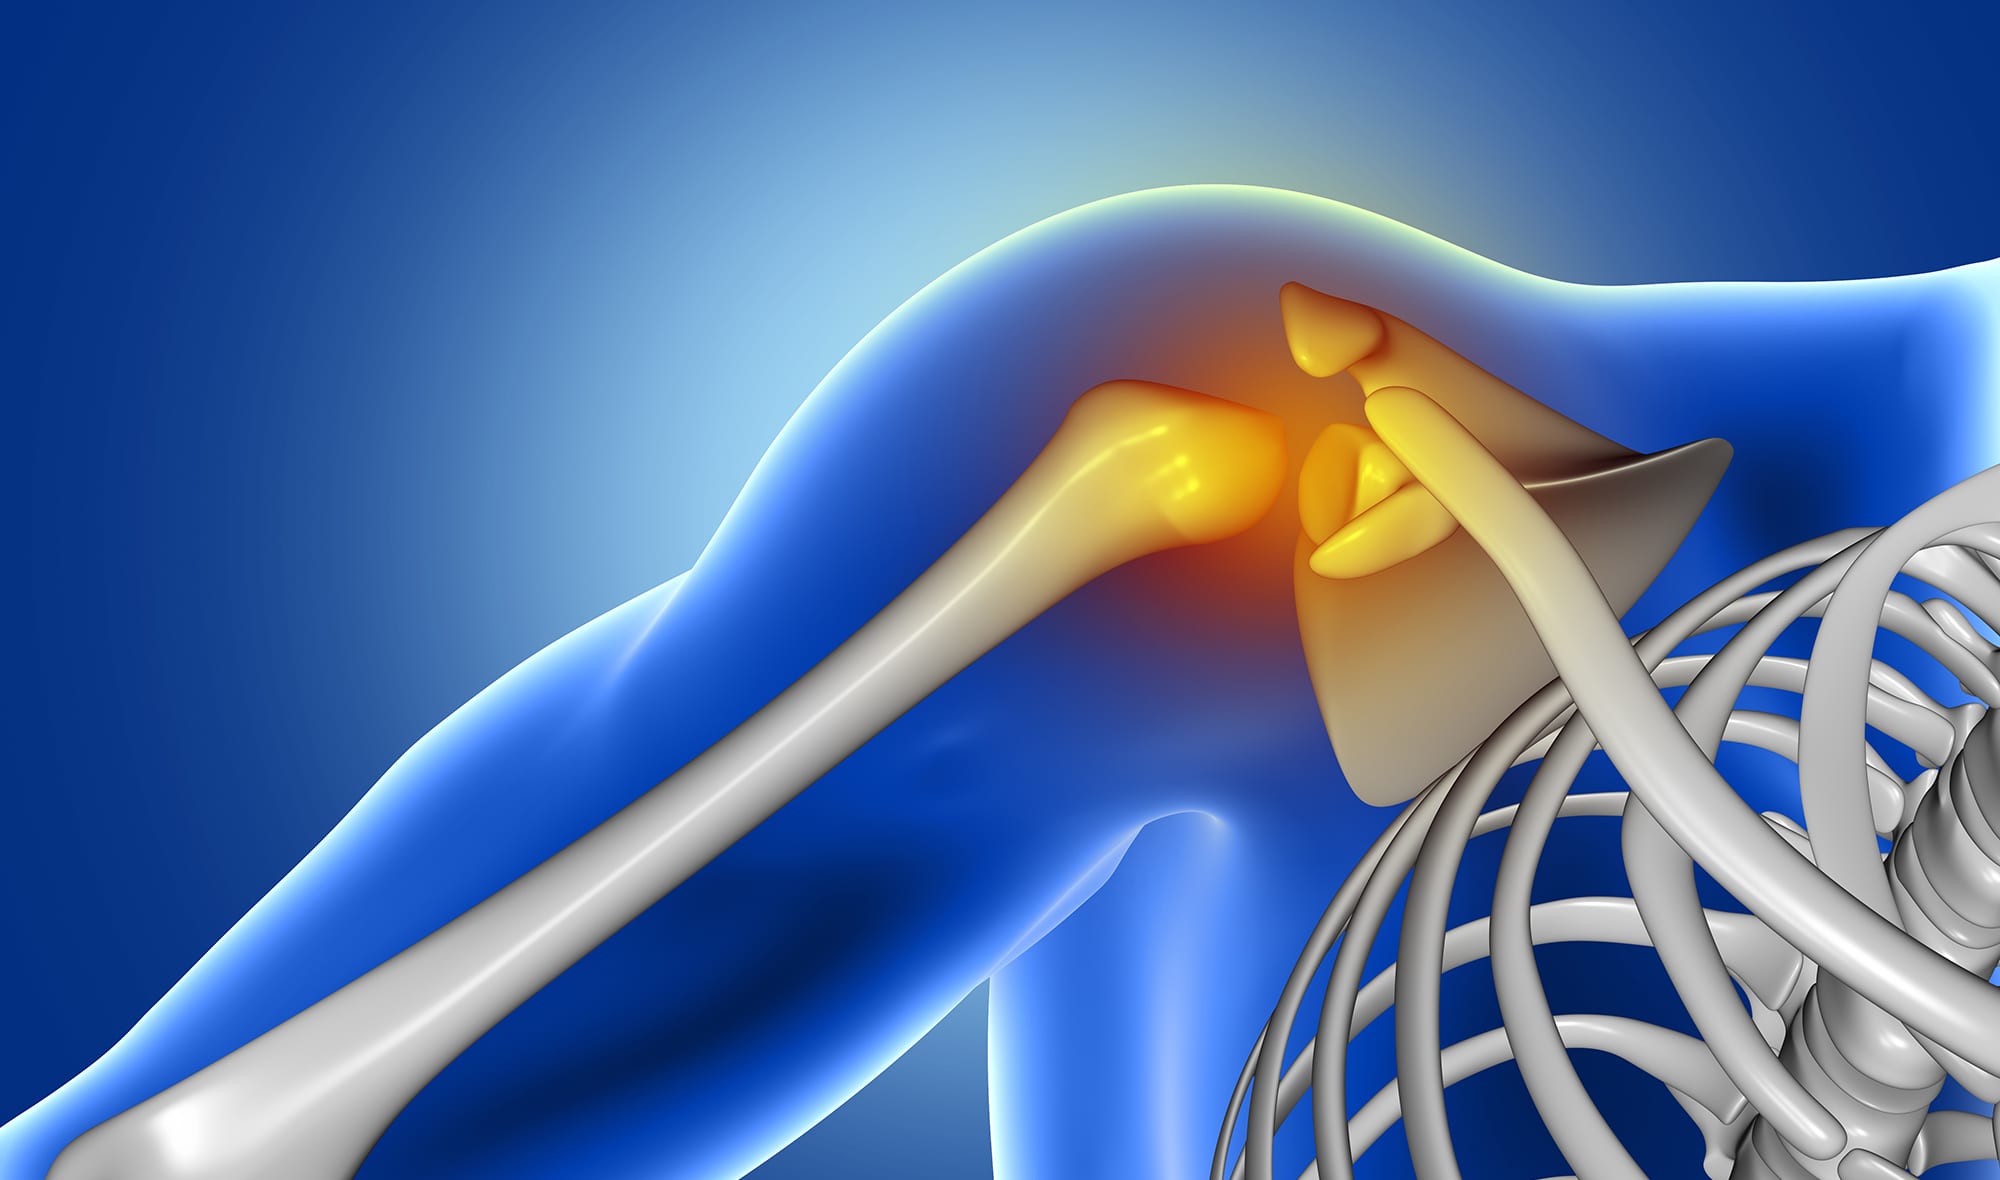 Cape Fear Orthopedics - We have specialty-trained shoulder doctors